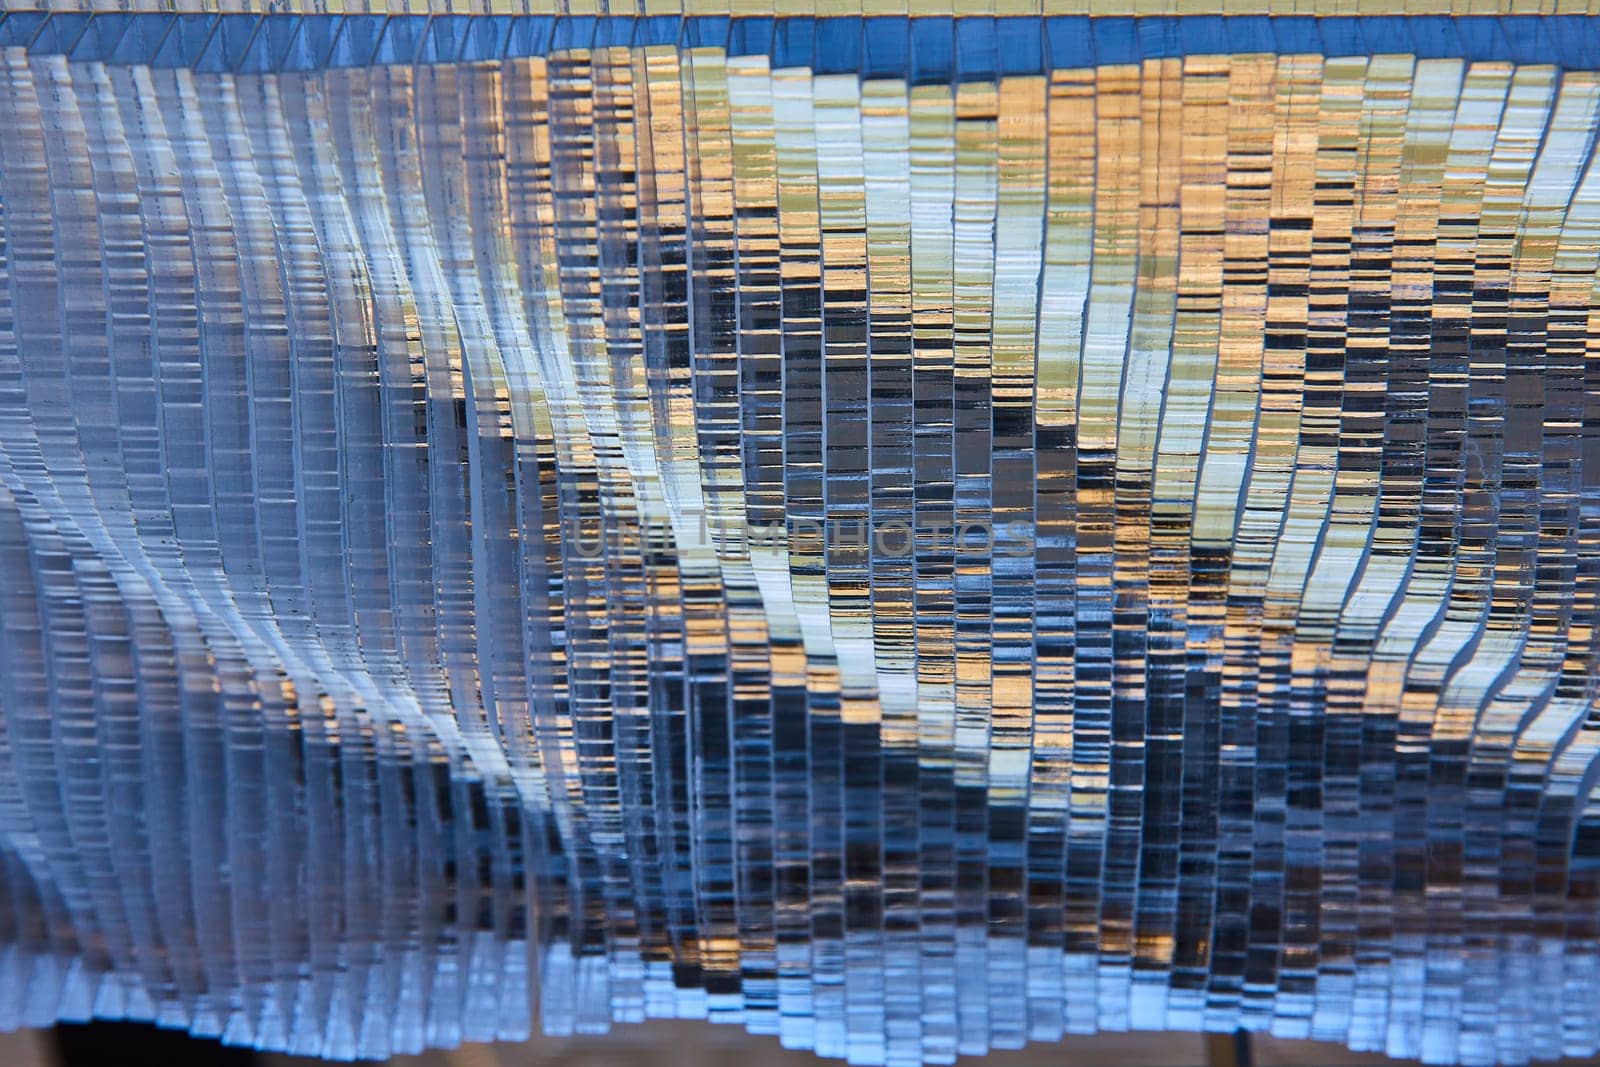 Image of Silvery metallic waves with golden highlights and blue shadows